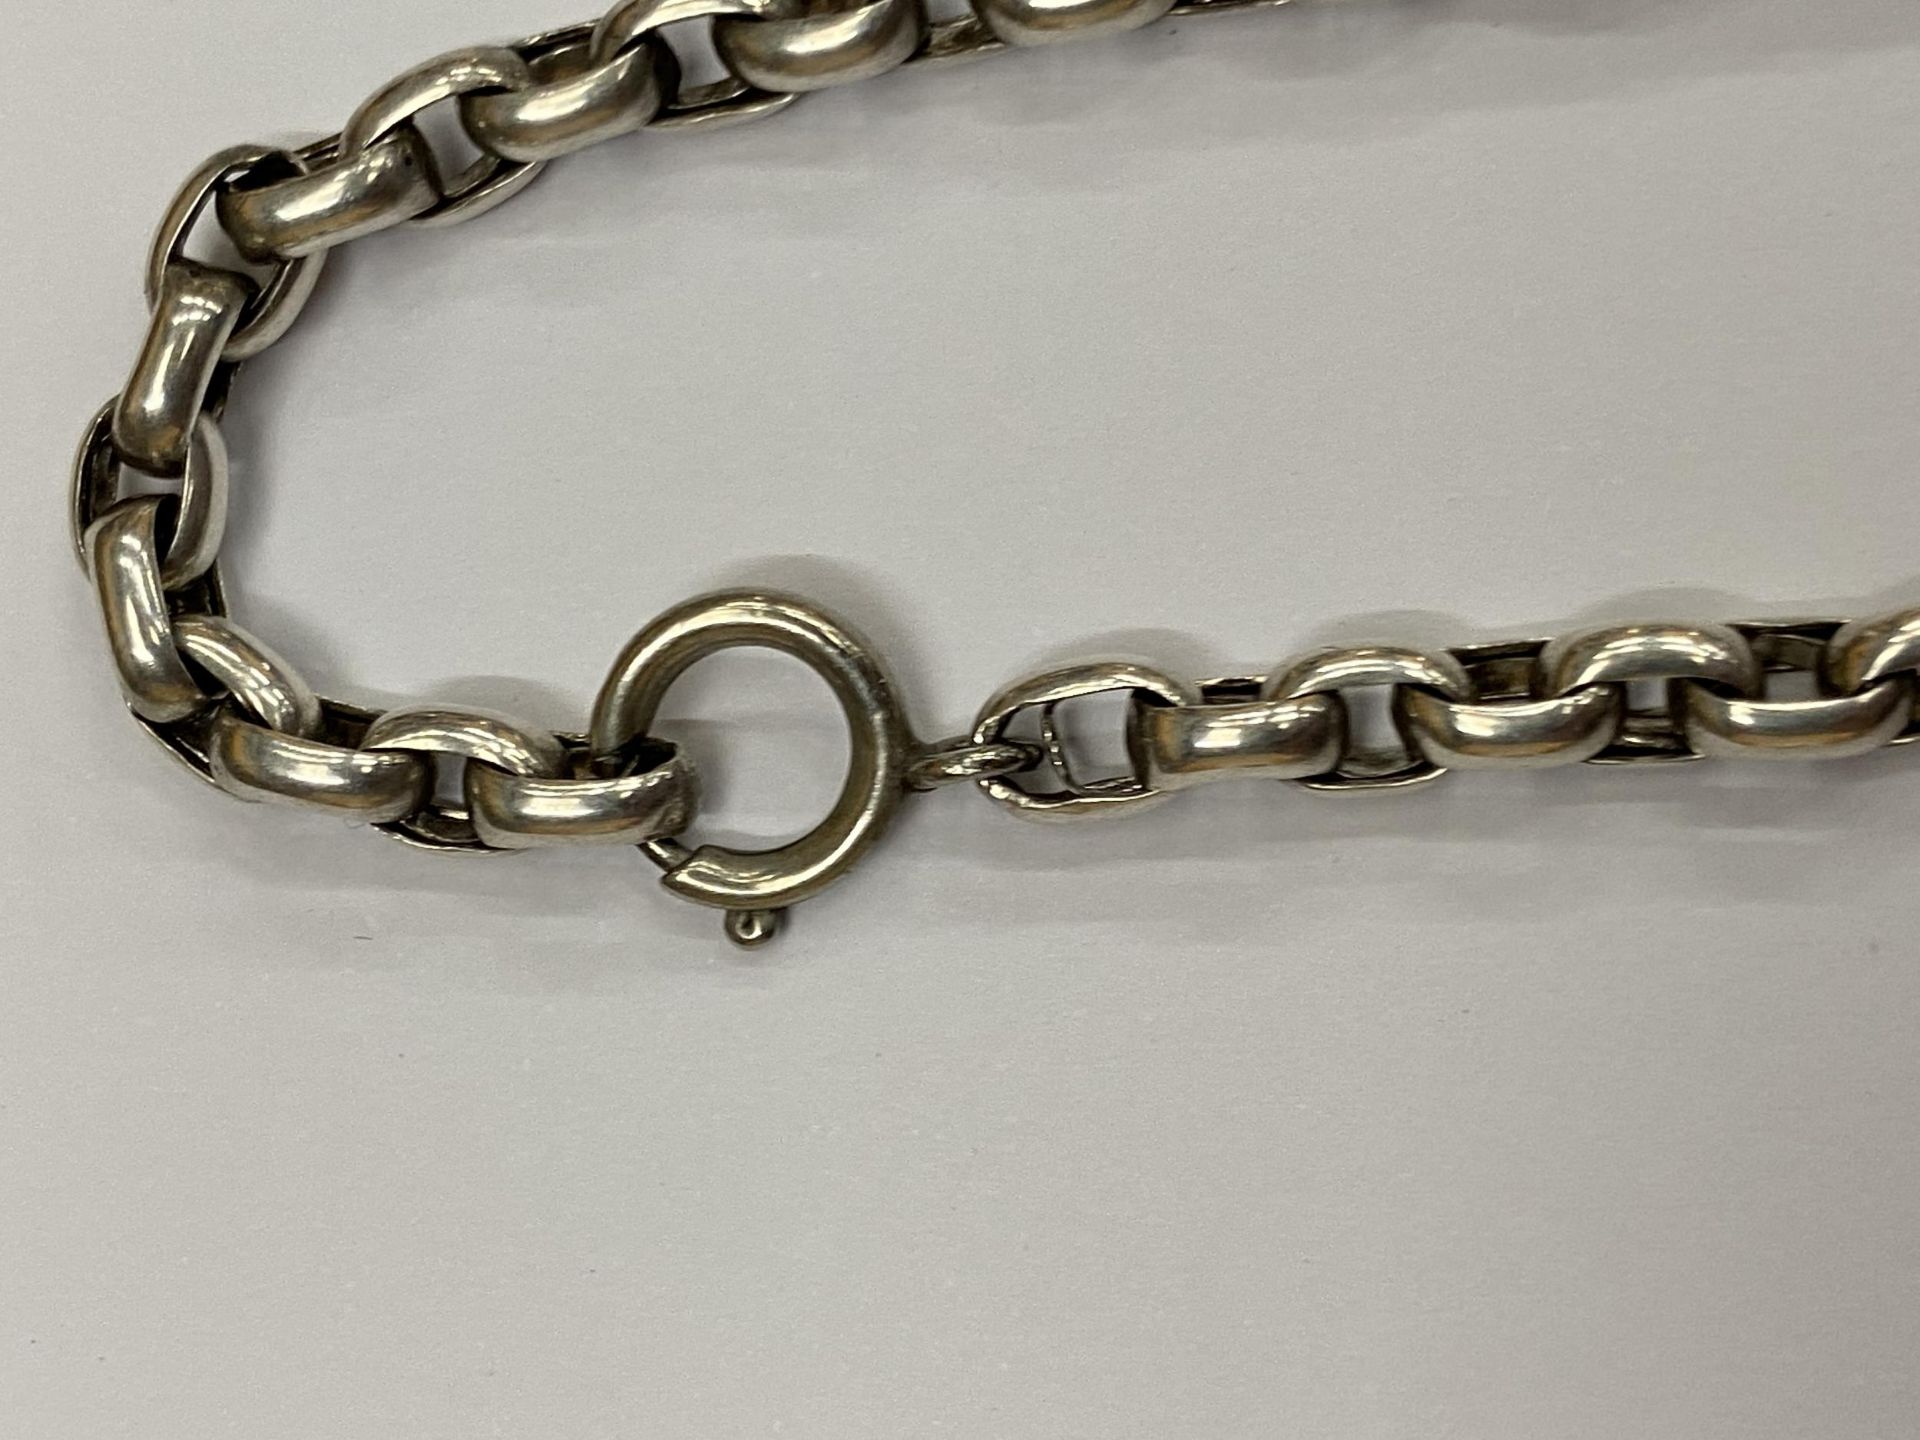 A 20" SILVER NECK CHAIN - Image 2 of 2